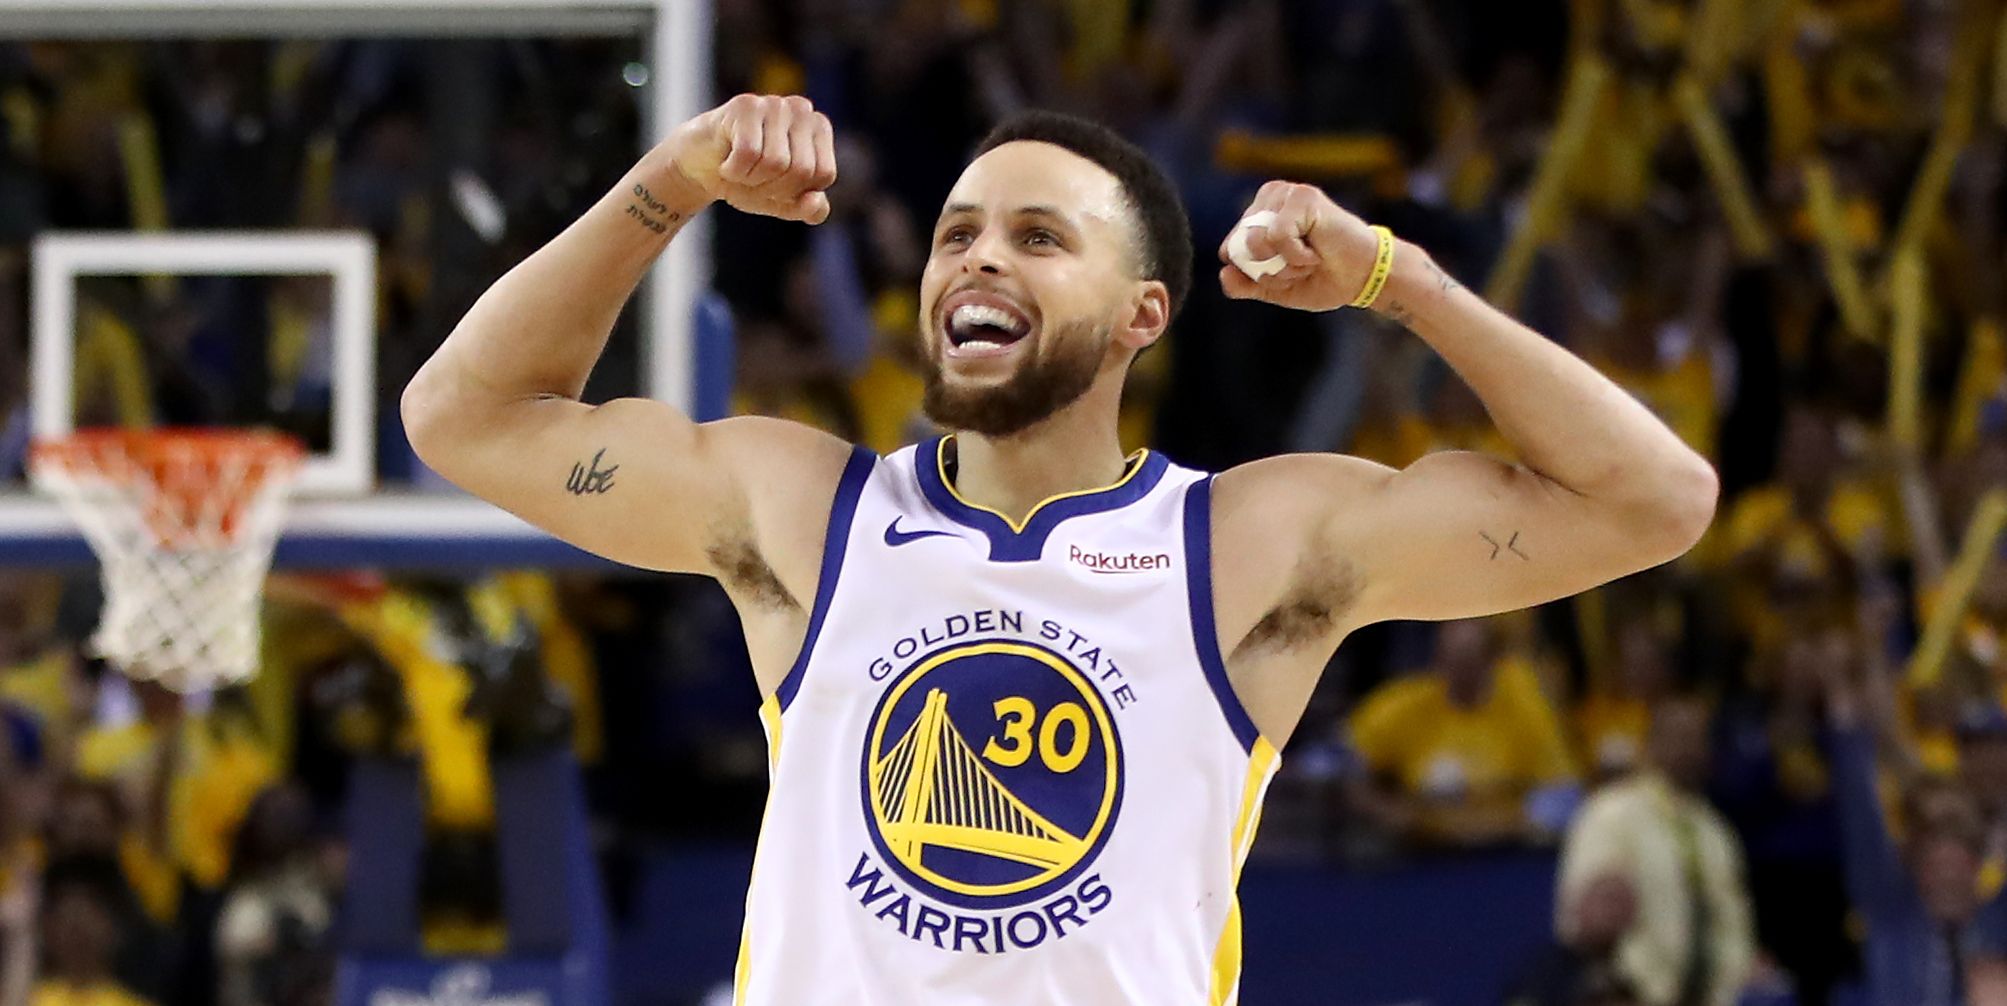 How to Train Like the Golden State Warriors [ARTICLE] - Pulse Ghana